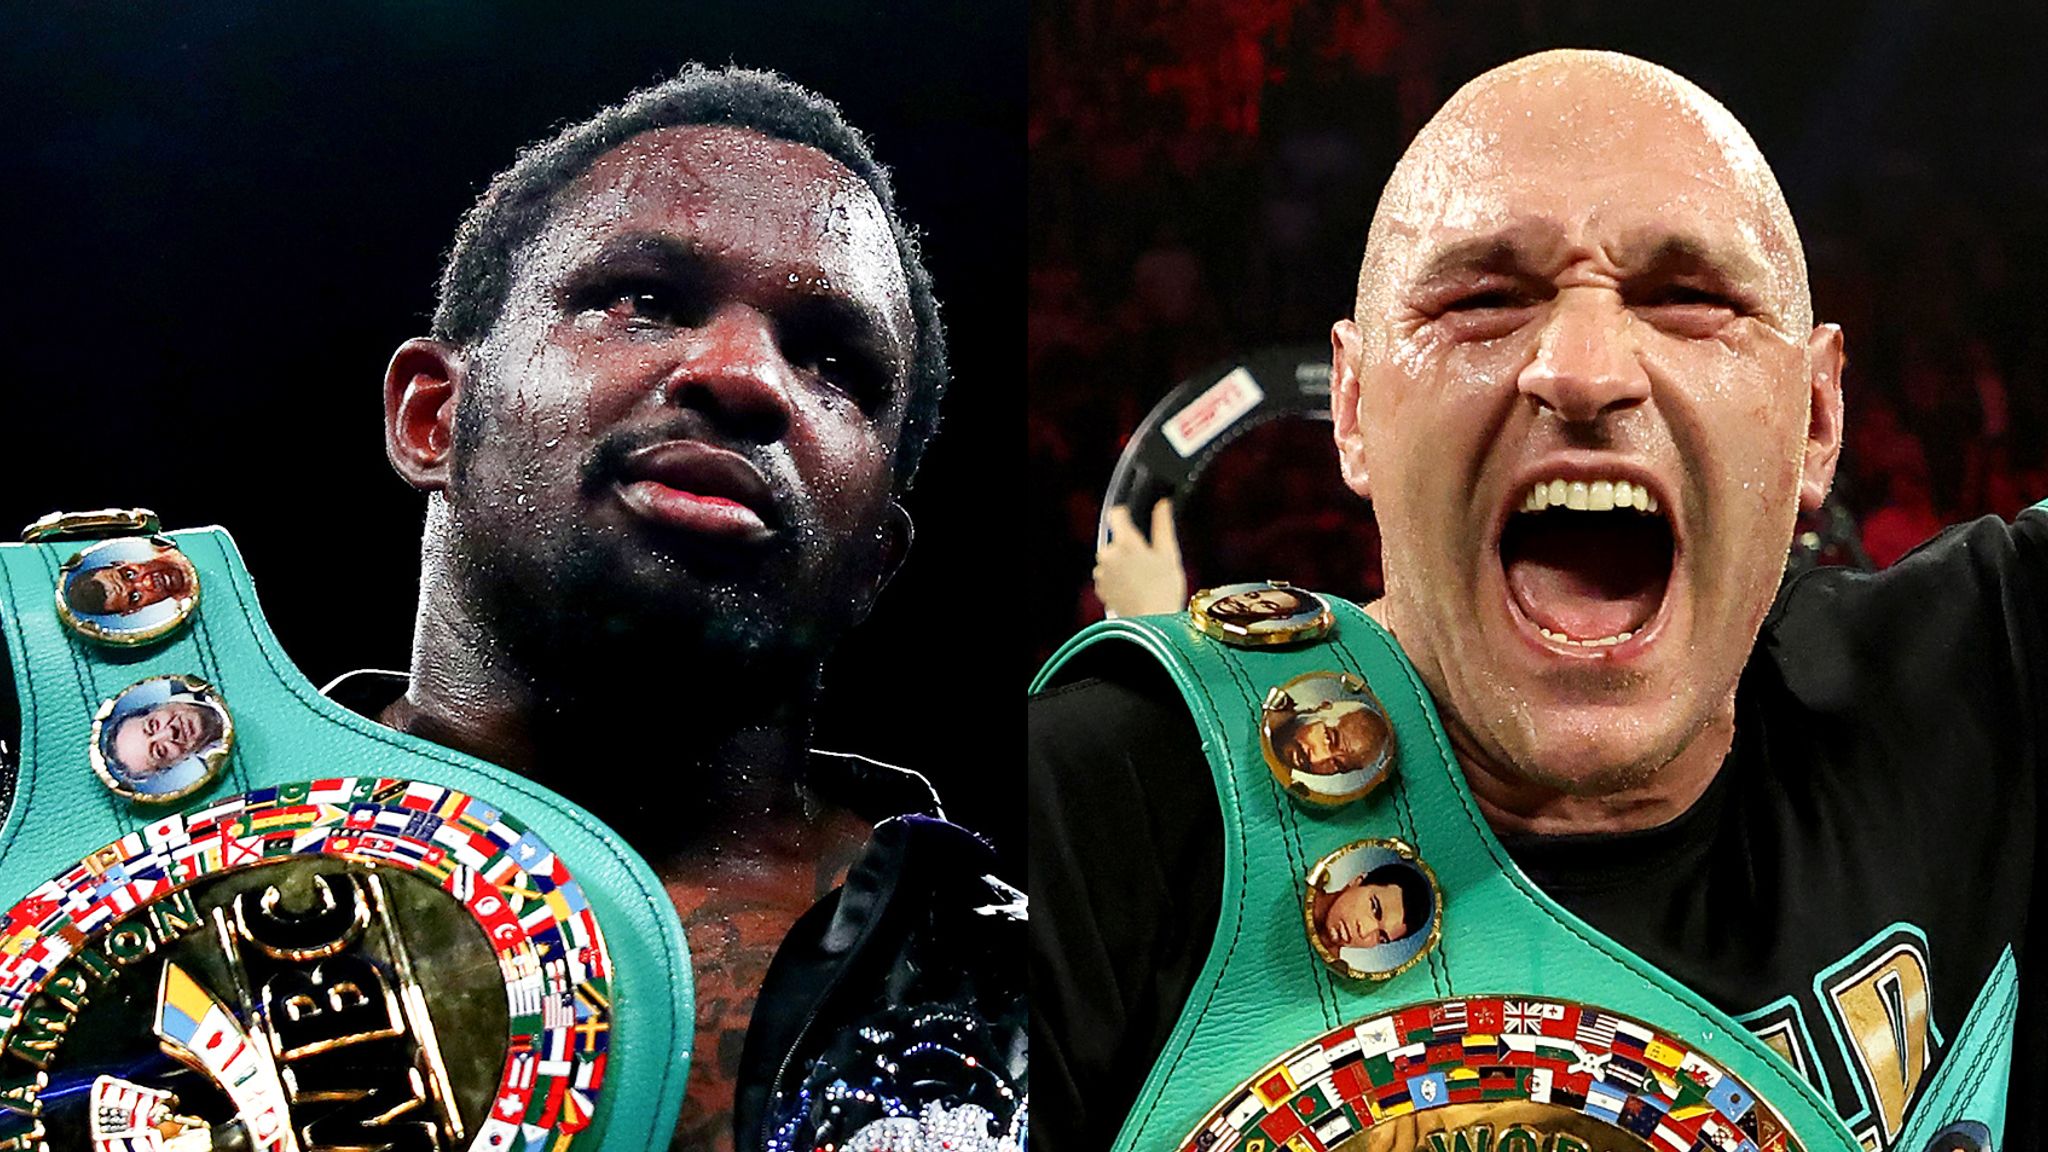 Tyson Fury vs Deontay Wilder 3 must happen this year or Dillian Whyte should be next challenger, says Eddie Hearn Boxing News Sky Sports